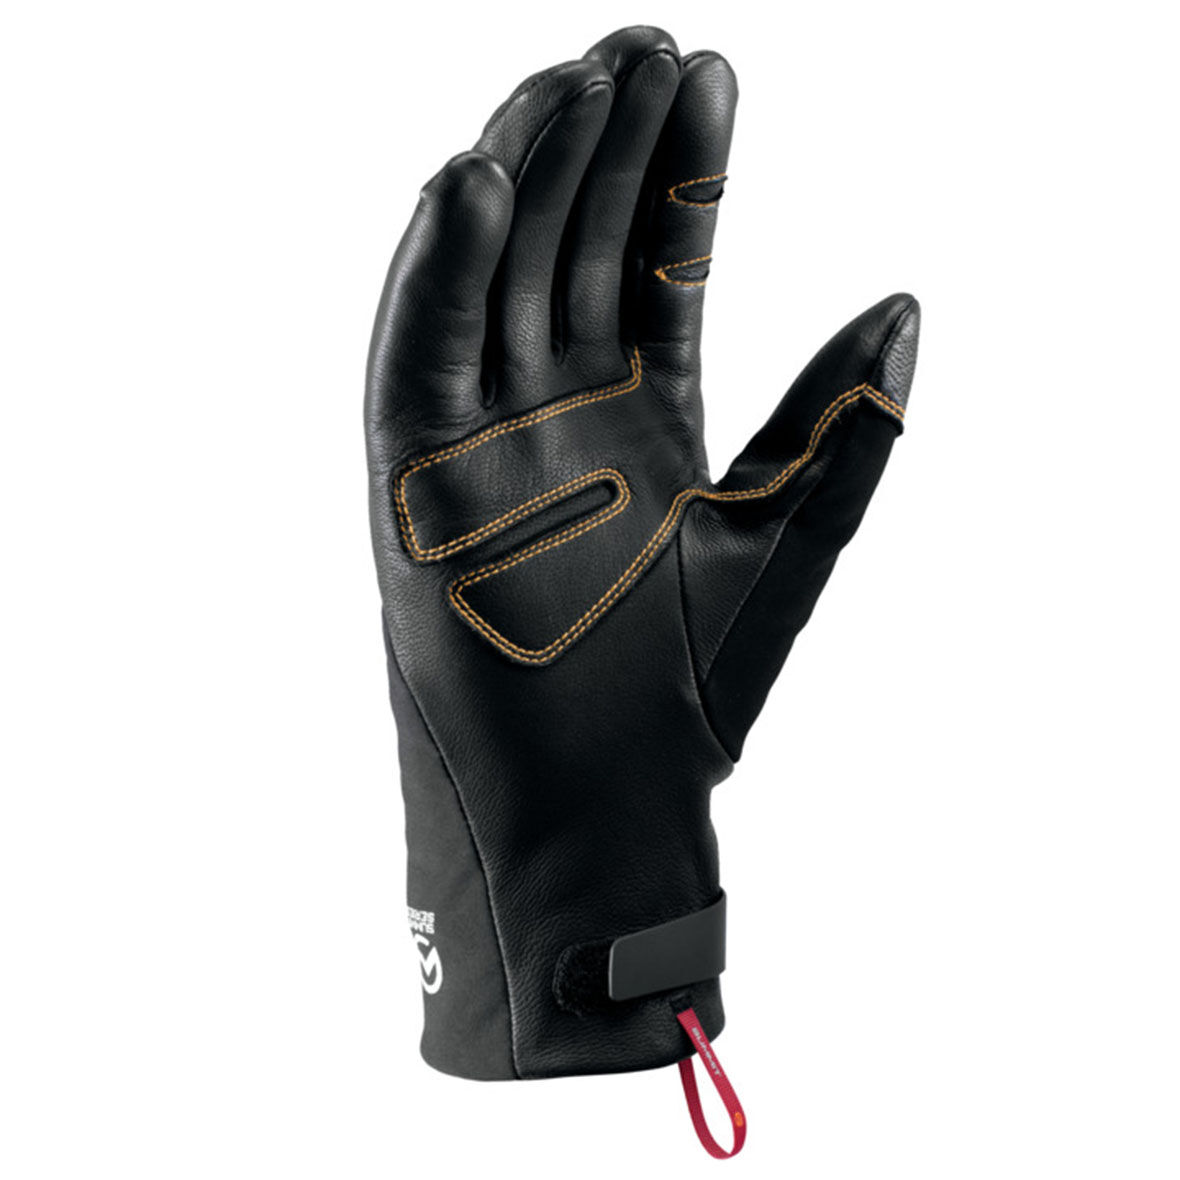 summit g3 insulated gloves review